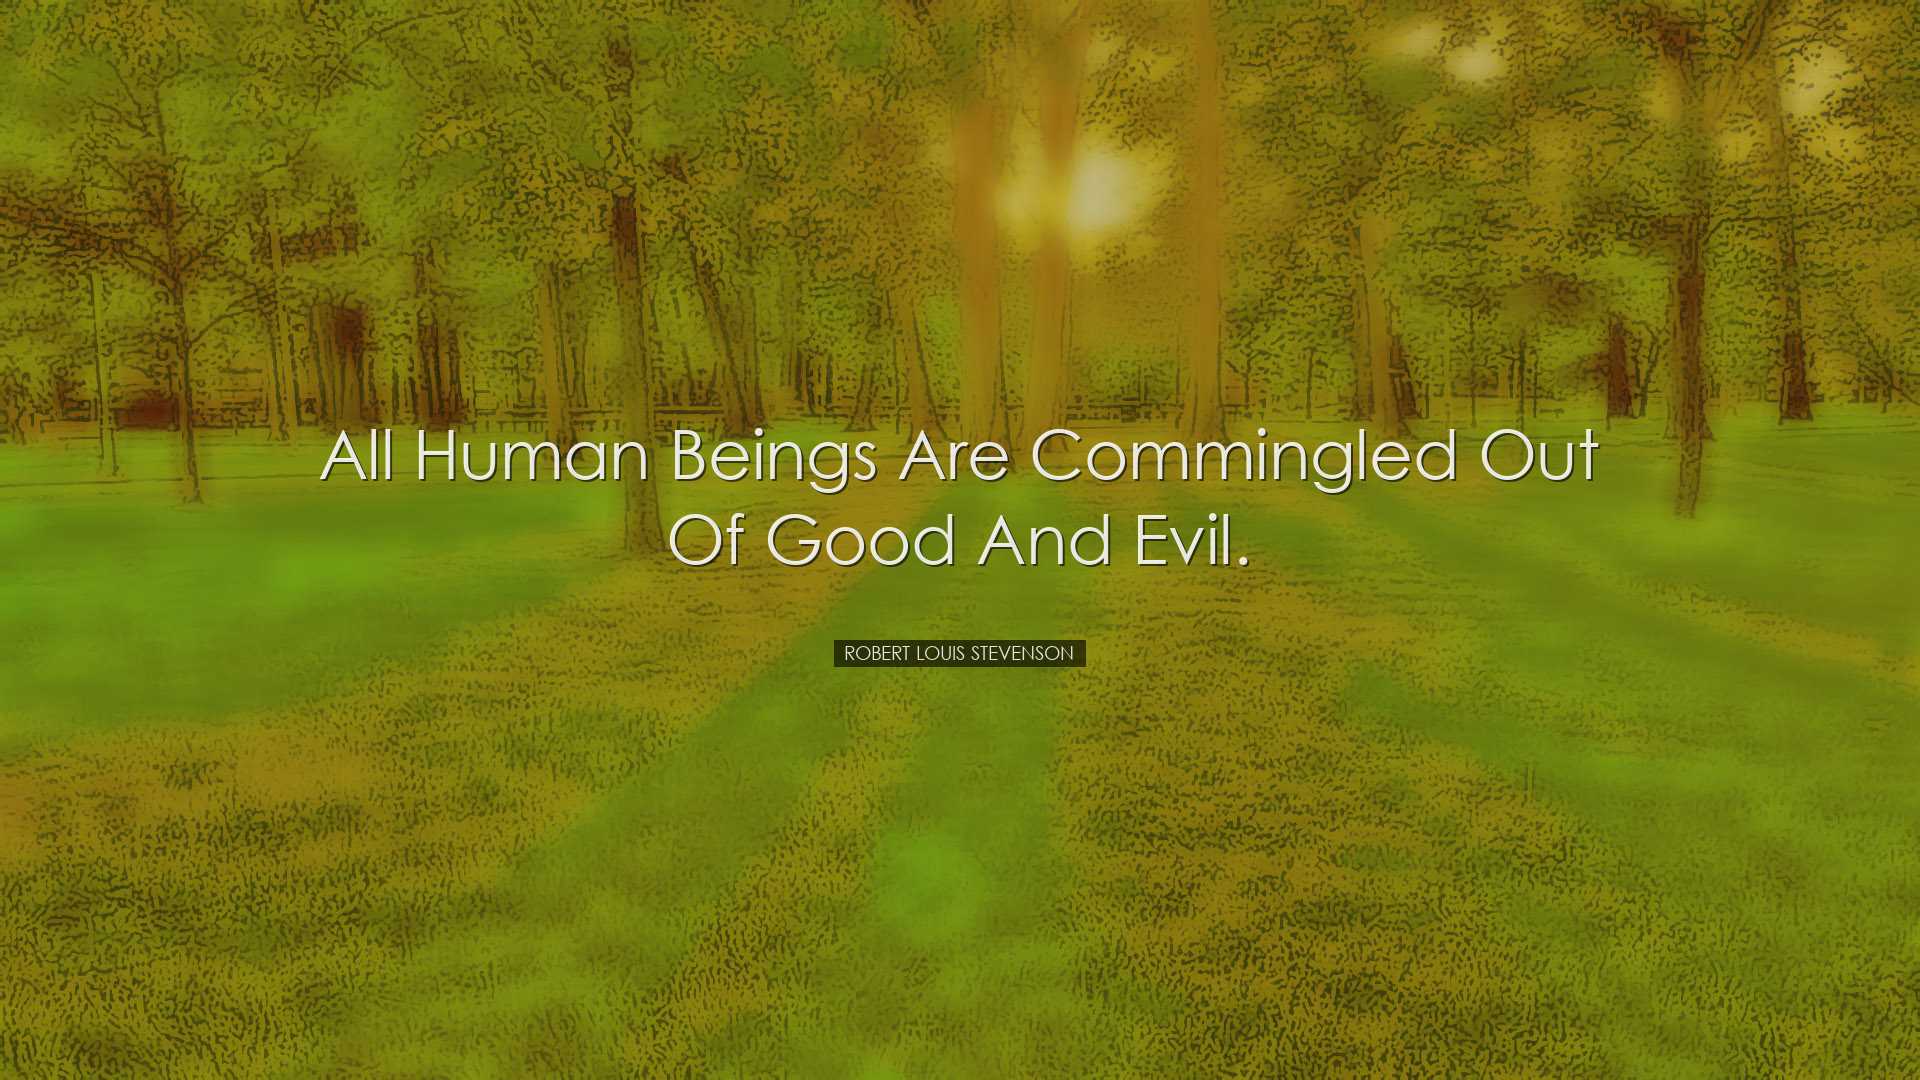 All human beings are commingled out of good and evil. - Robert Lou